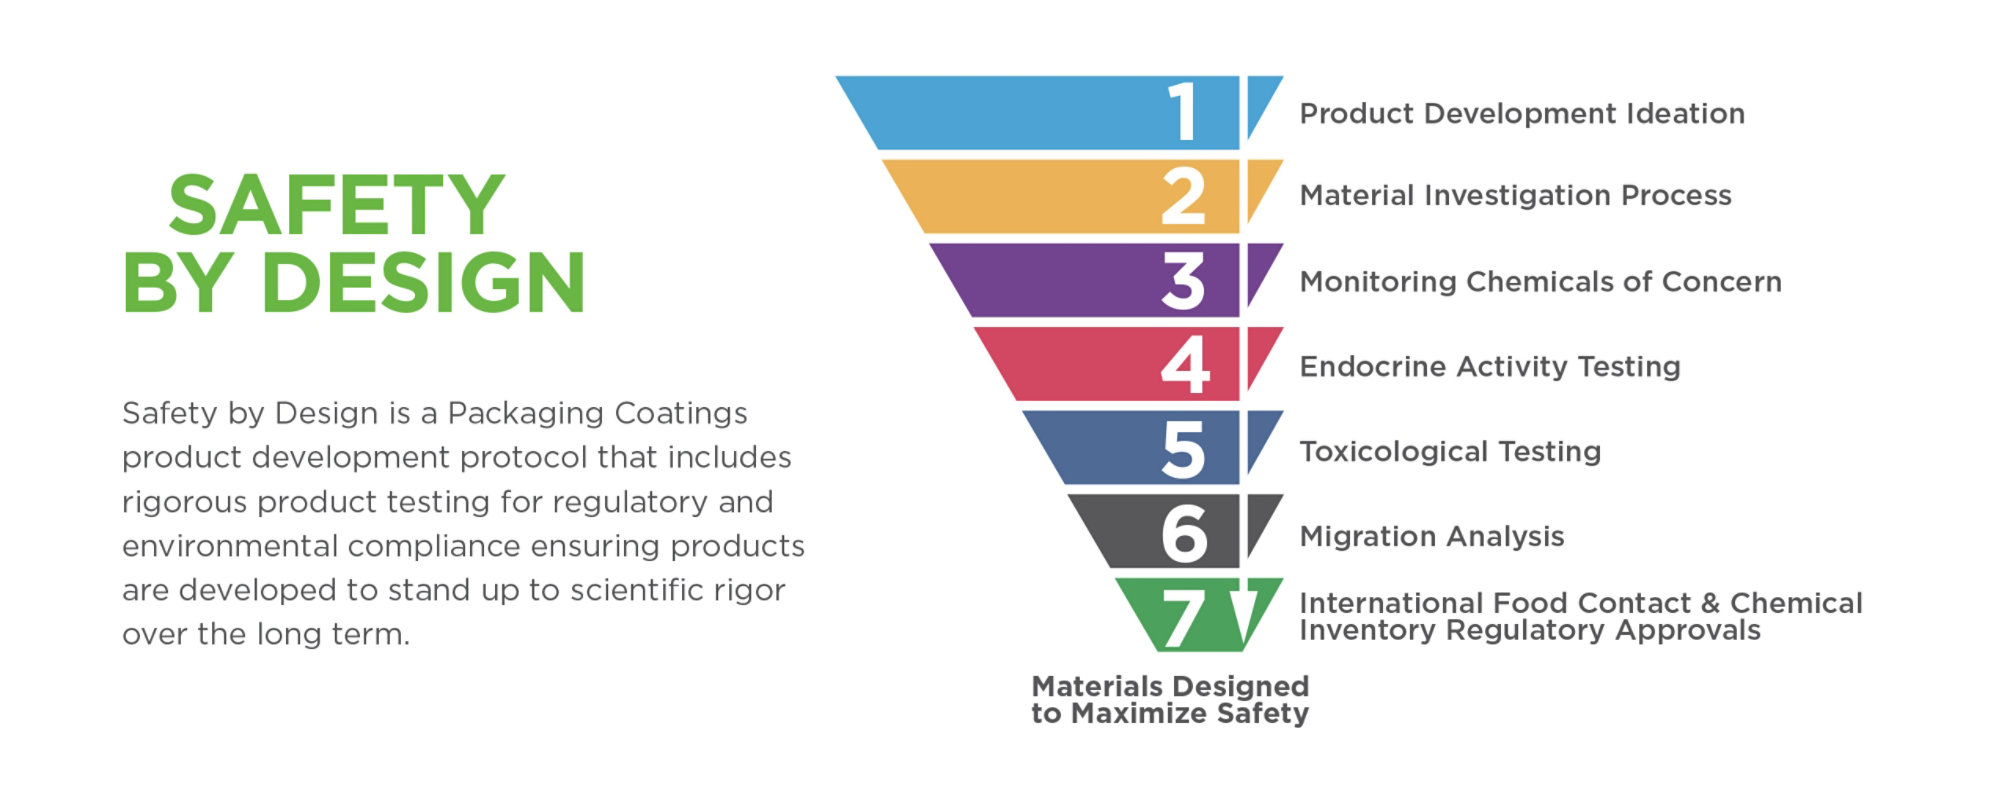 safety by design funnel starting at top with product development ideation, material investigation process, monitoring chemicals of concern, endocrine activity, testing, toxicological testing, migration analysis, international food contact & chemical inventory regulatory approvals lead to materials designed to maximize safety.  Safety by design is a packaging coatings product devleopment protocol that includes rigorous product testing for egulatory and environmental compliance ensure products are developed to stand up to scientific rigor over the long term 